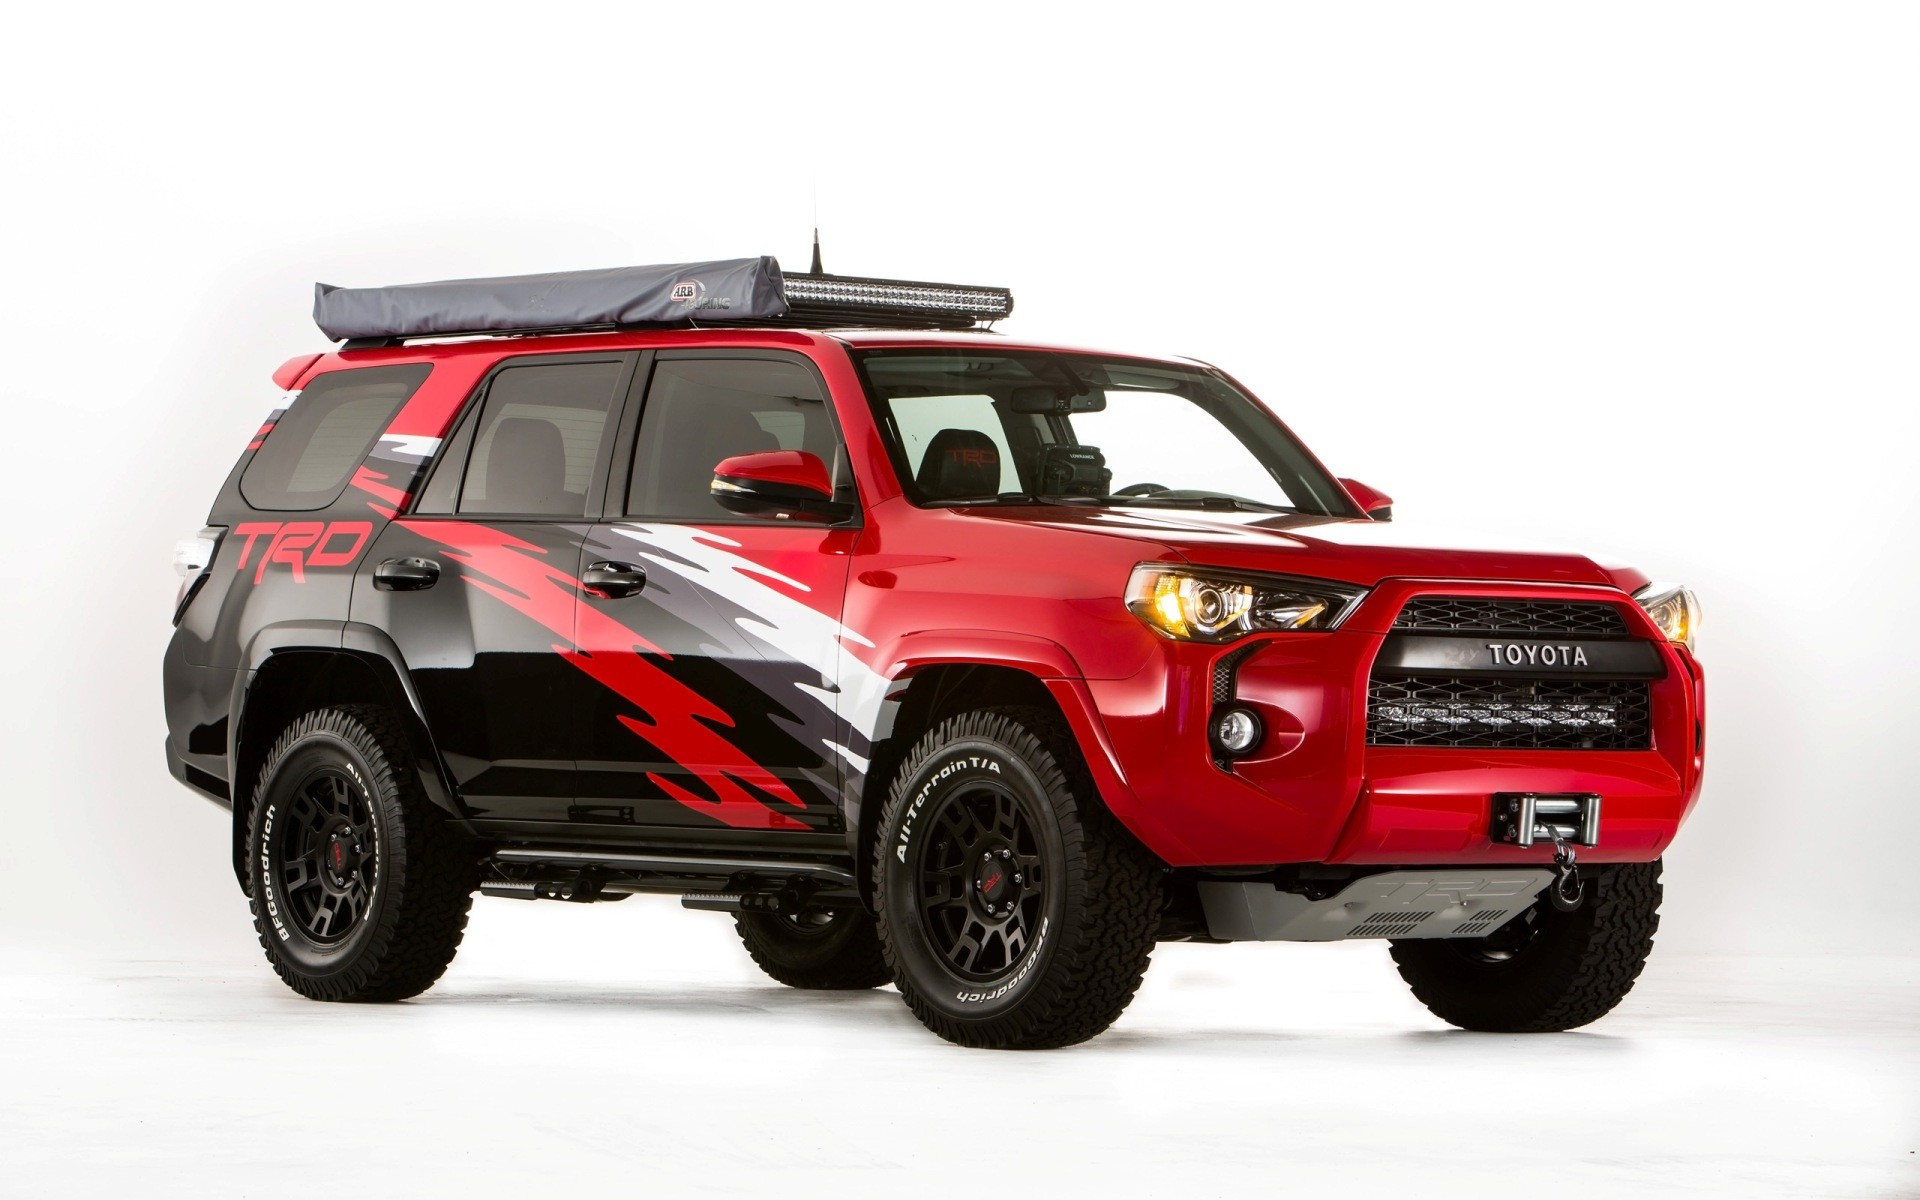 General 1920x1200 Toyota TRD 4Runner car vehicle red cars white background simple background SUV offroad Japanese cars